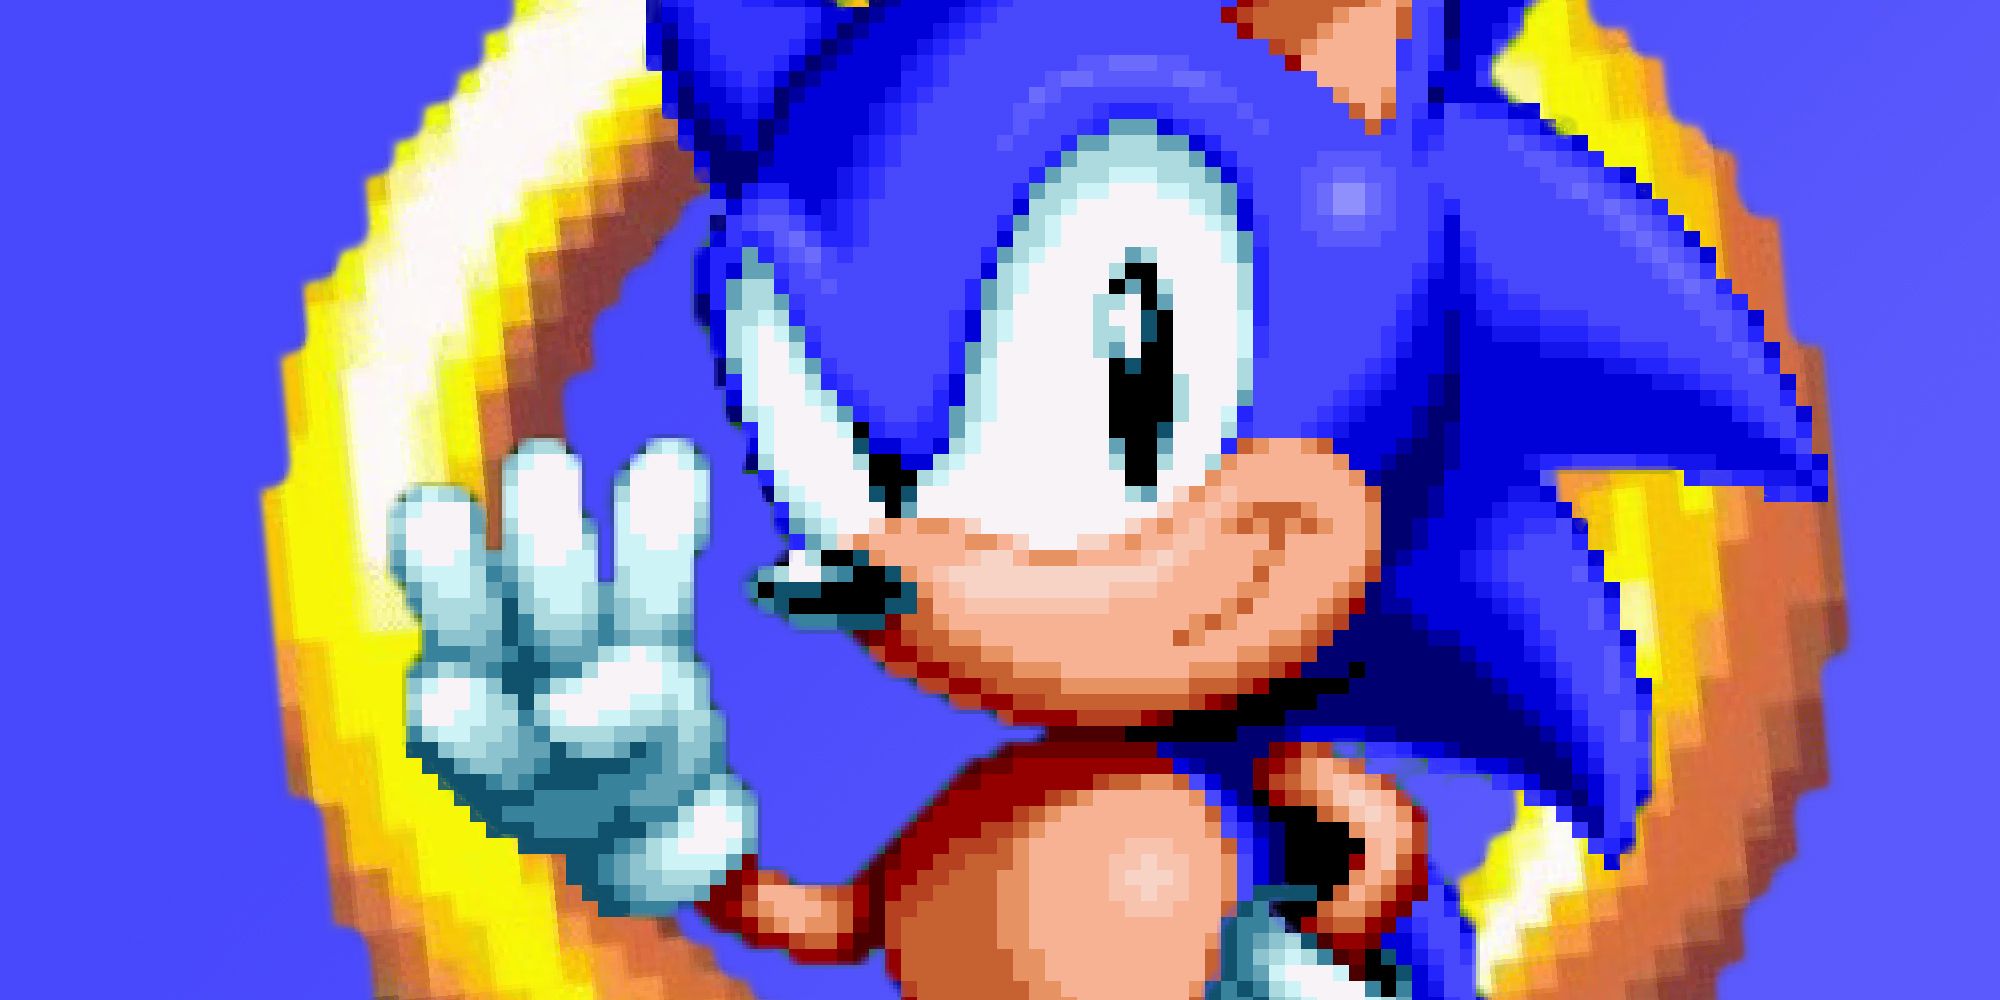 Sonic 3 Continue Music [Sonic 3 A.I.R.] [Mods]